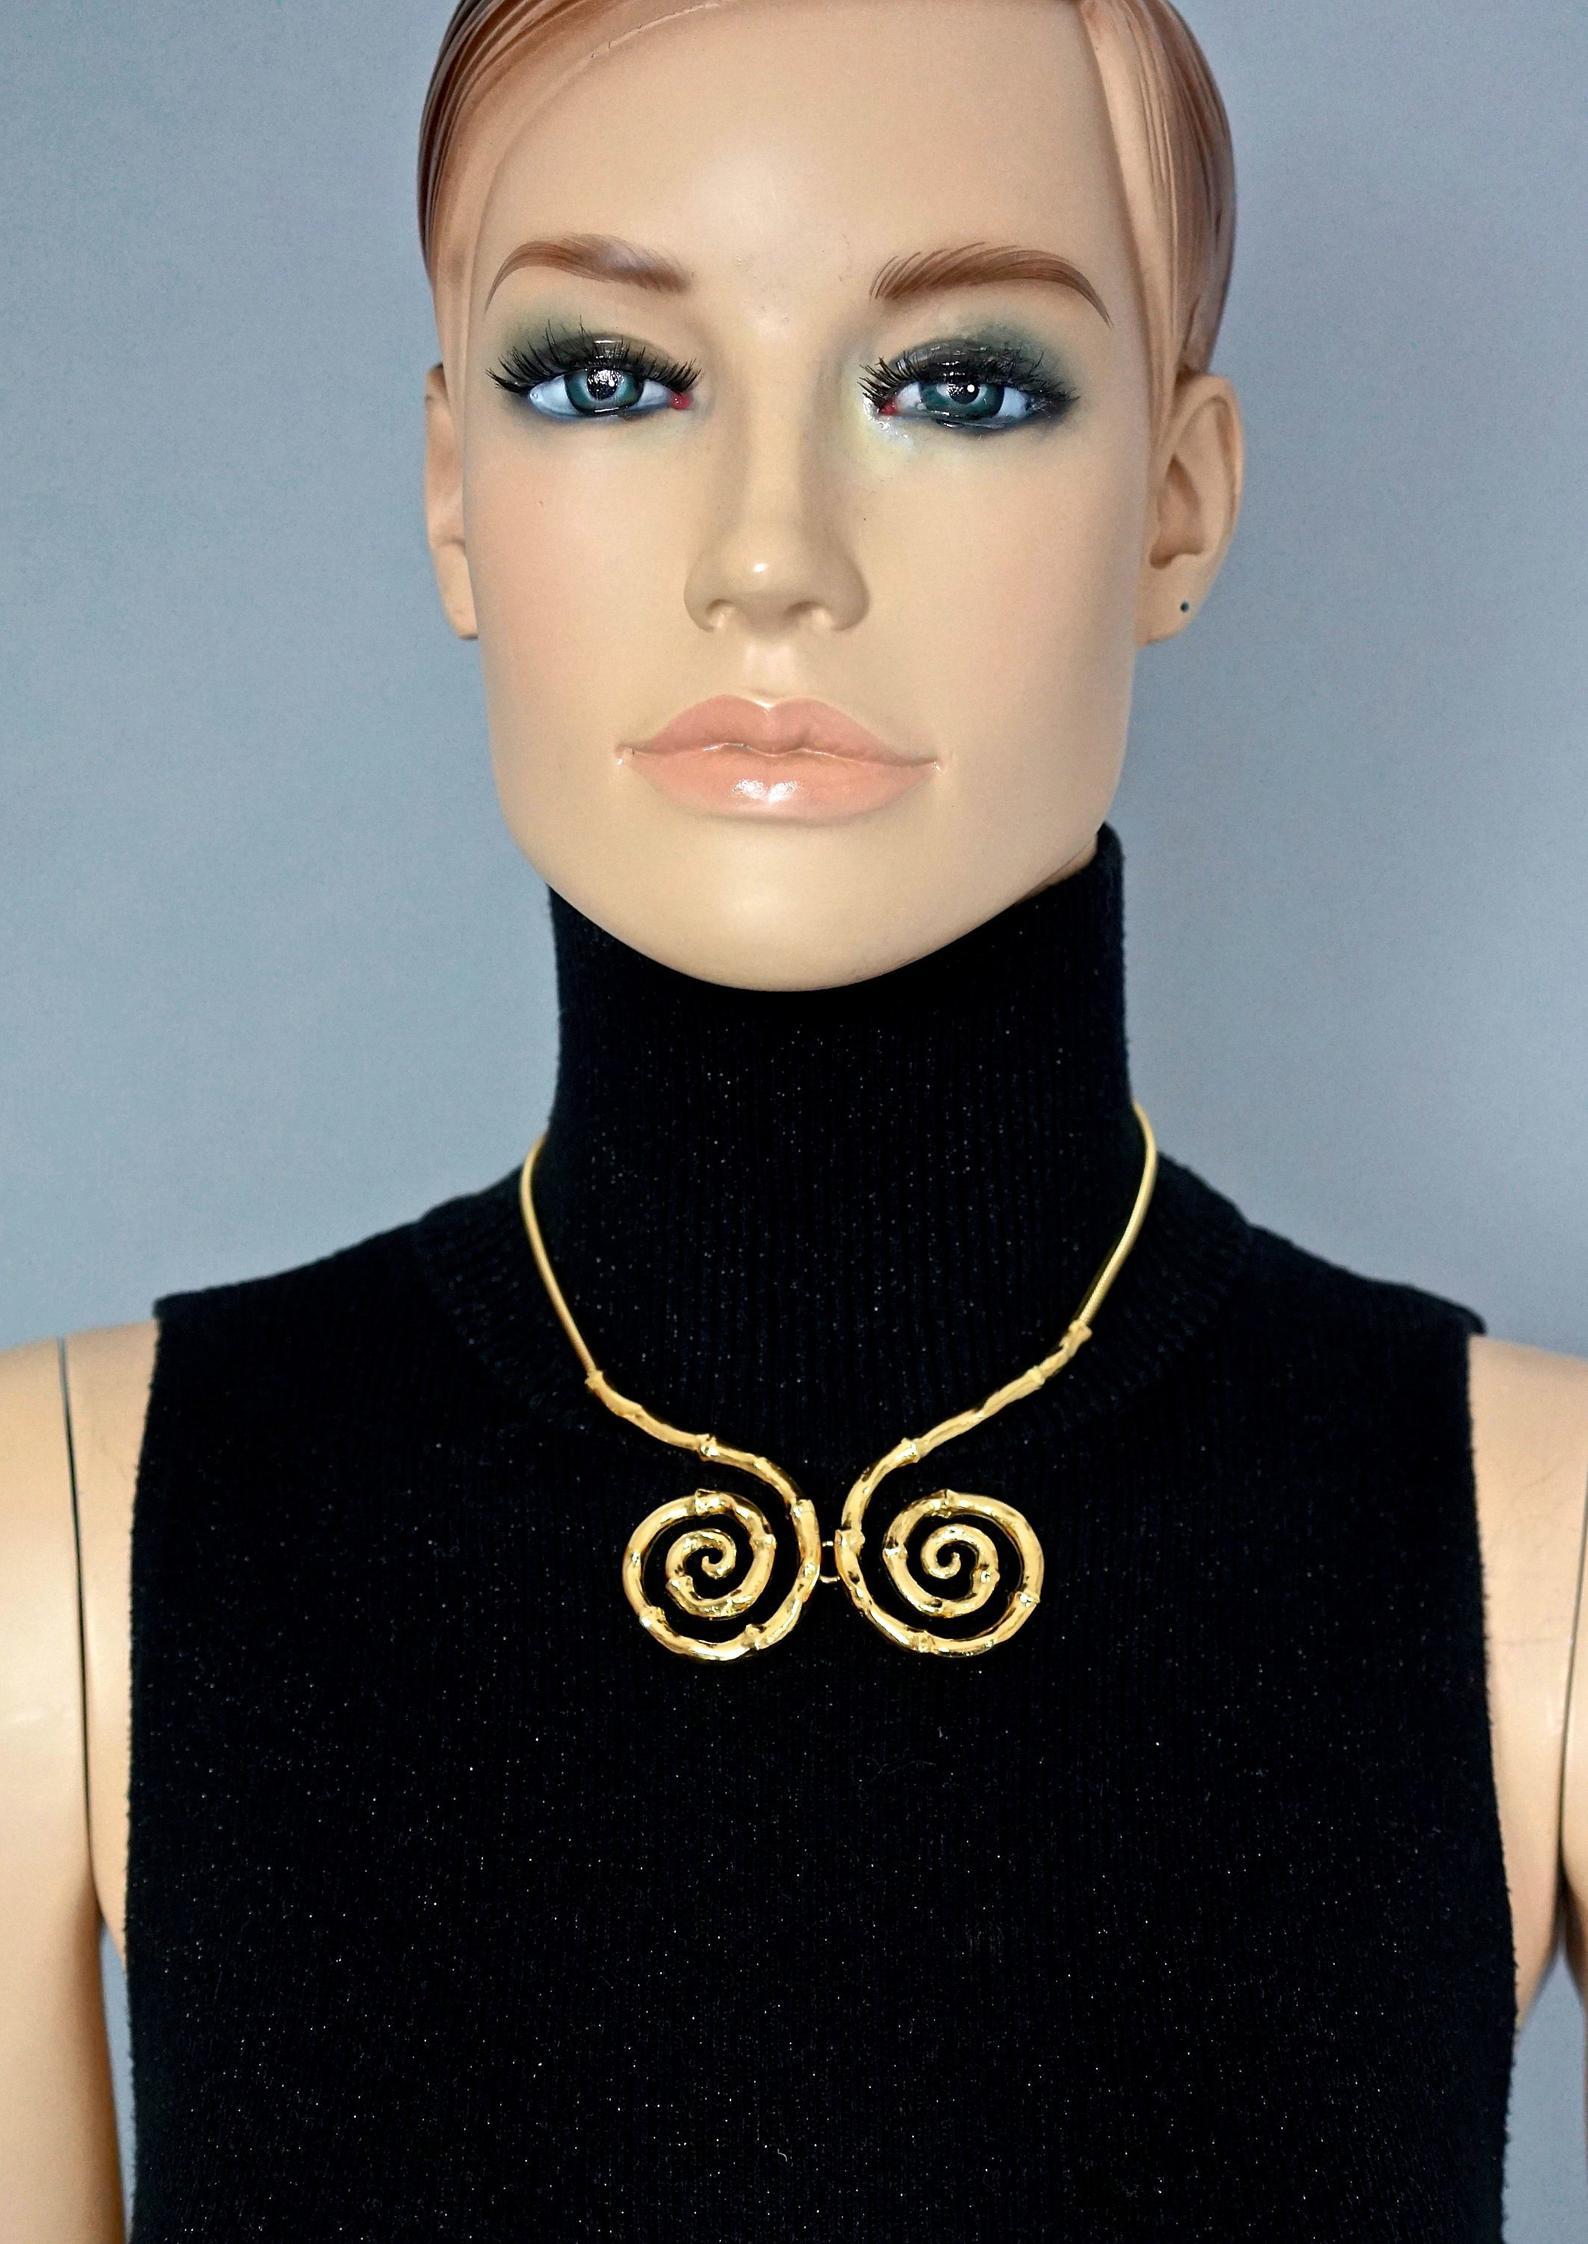 Vintage YVES SAINT LAURENT Ysl Bamboo Spiral Necklace

Measurements:
Height: 2.55 inches (6.5 cm)
Wearable Length: 15.74 inches to 18.11 inches (40cm to 46 cm)

Features:
- 100% Authentic YVES SAINT LAURENT.
- Gilt bamboo spiral centrepiece.
- Snake